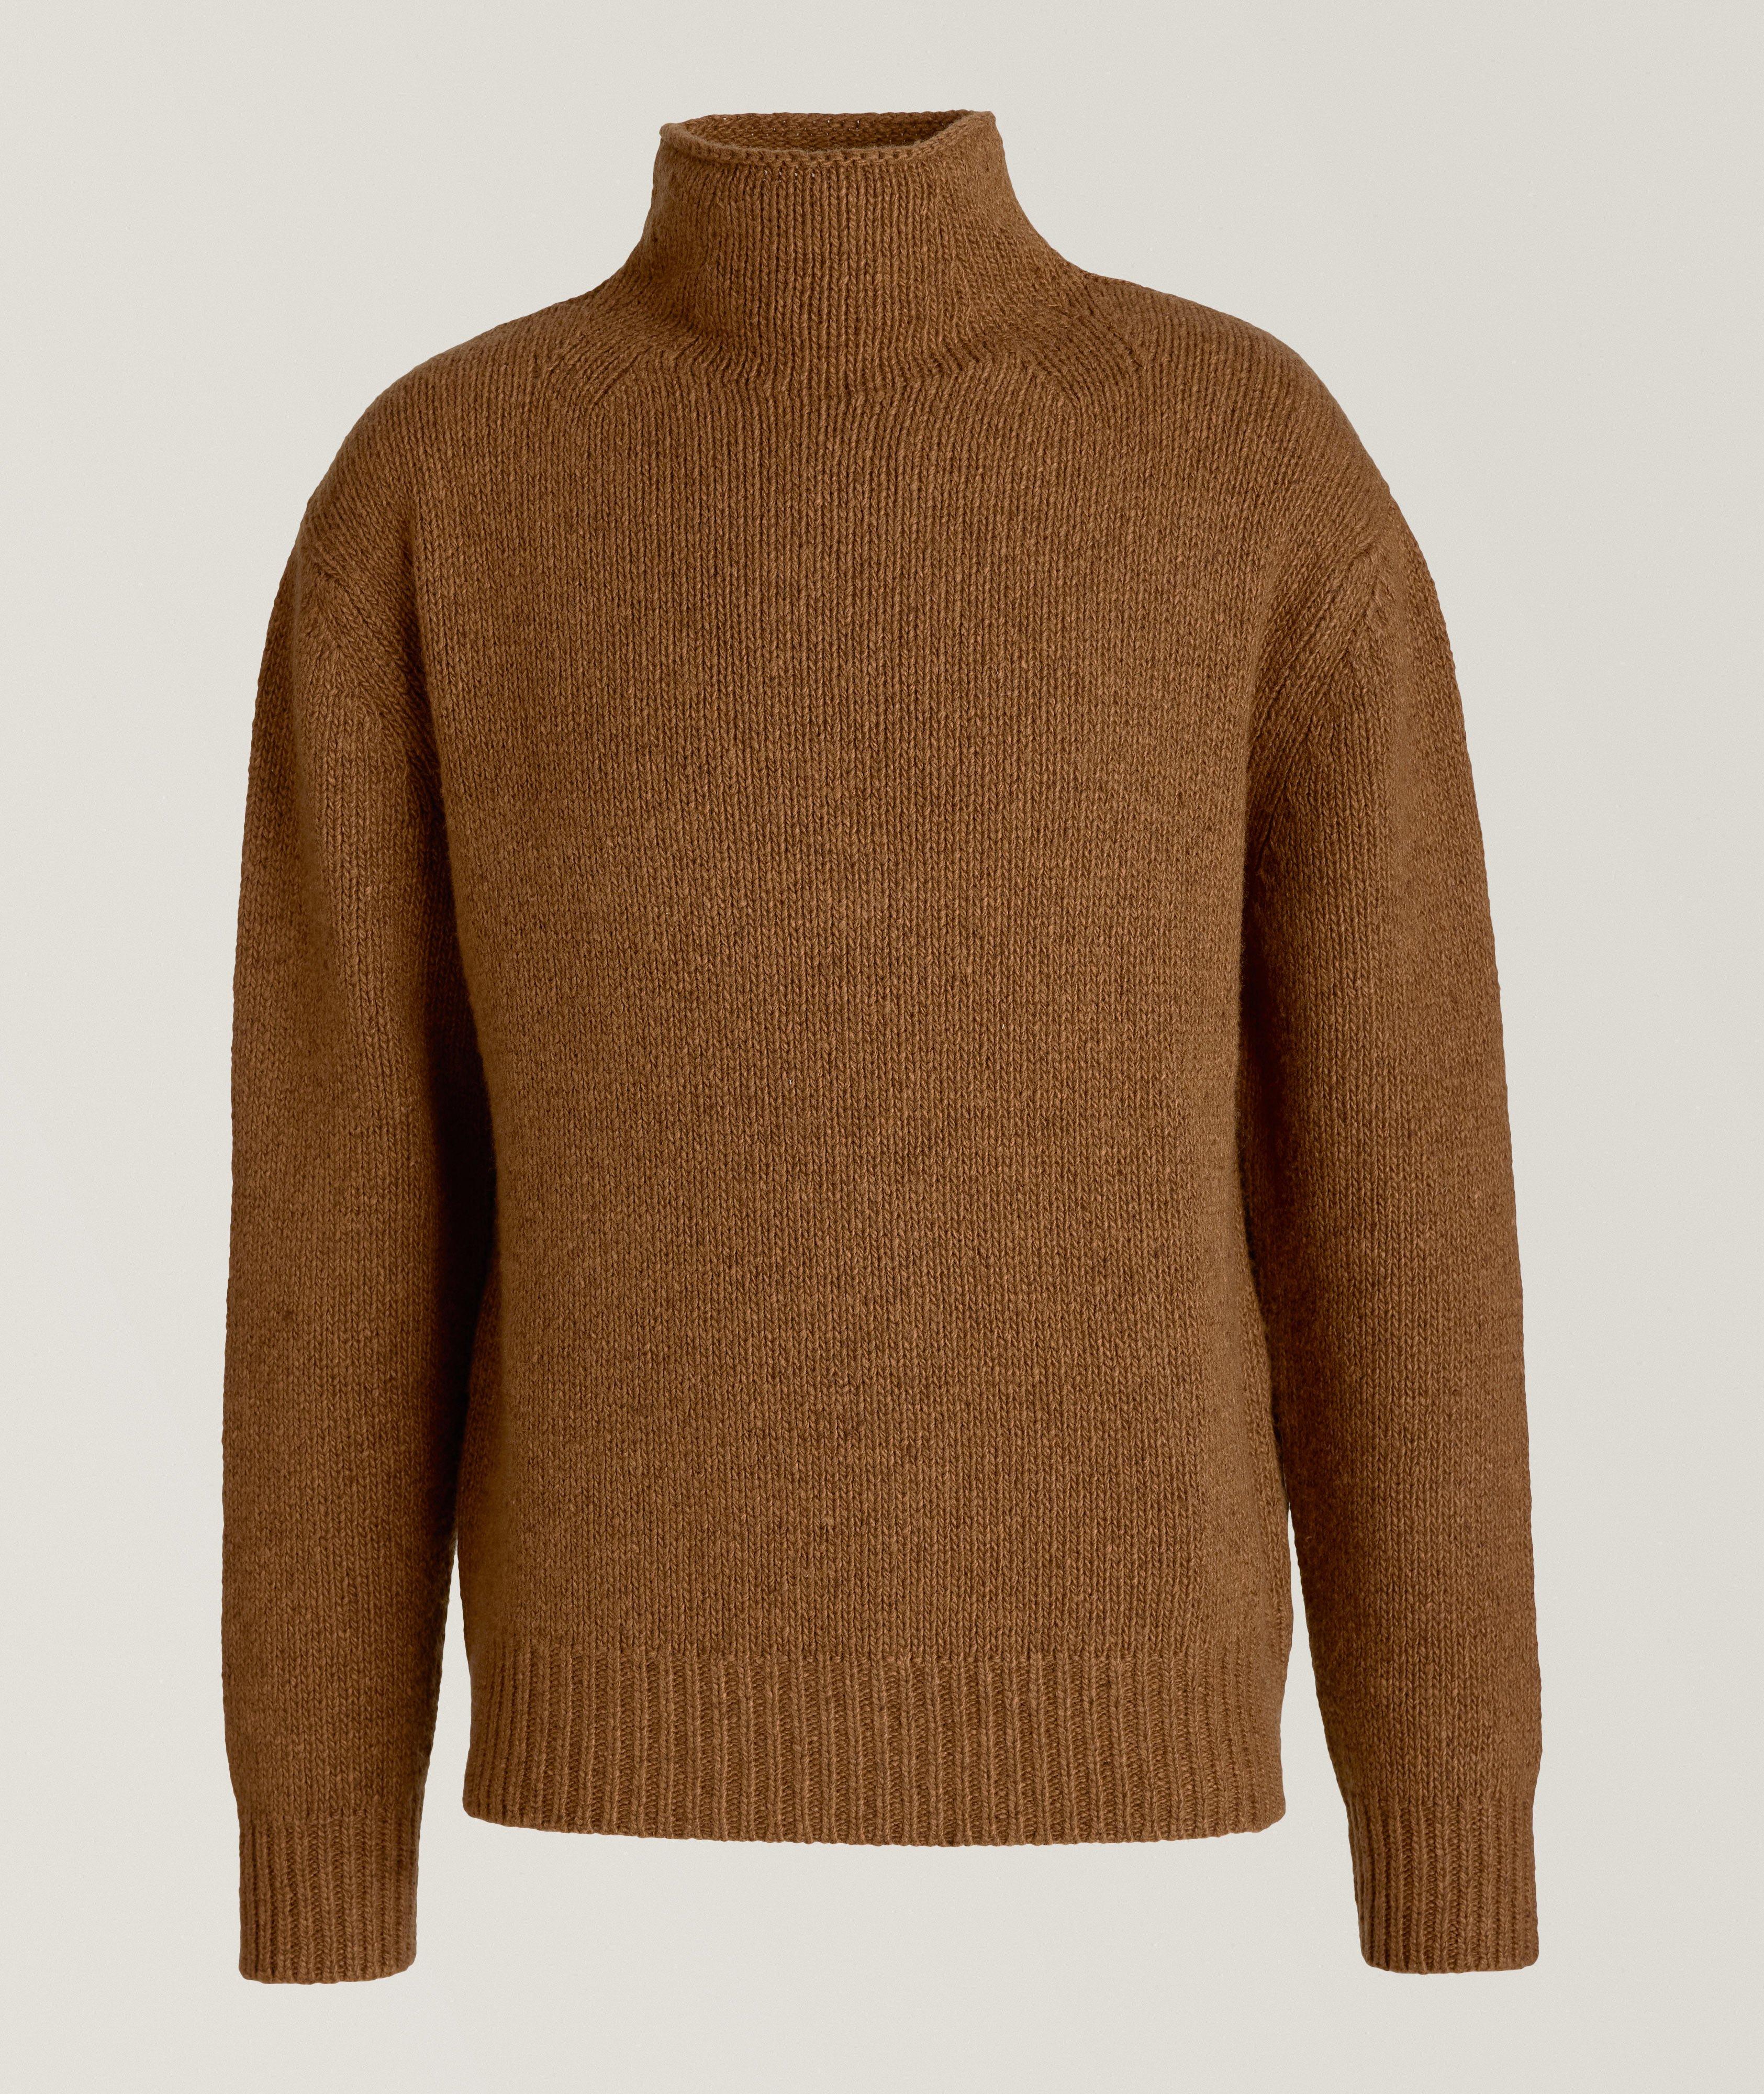 Zegna Mélange Oasi Cashmere High Neck Sweater, Sweaters & Knits